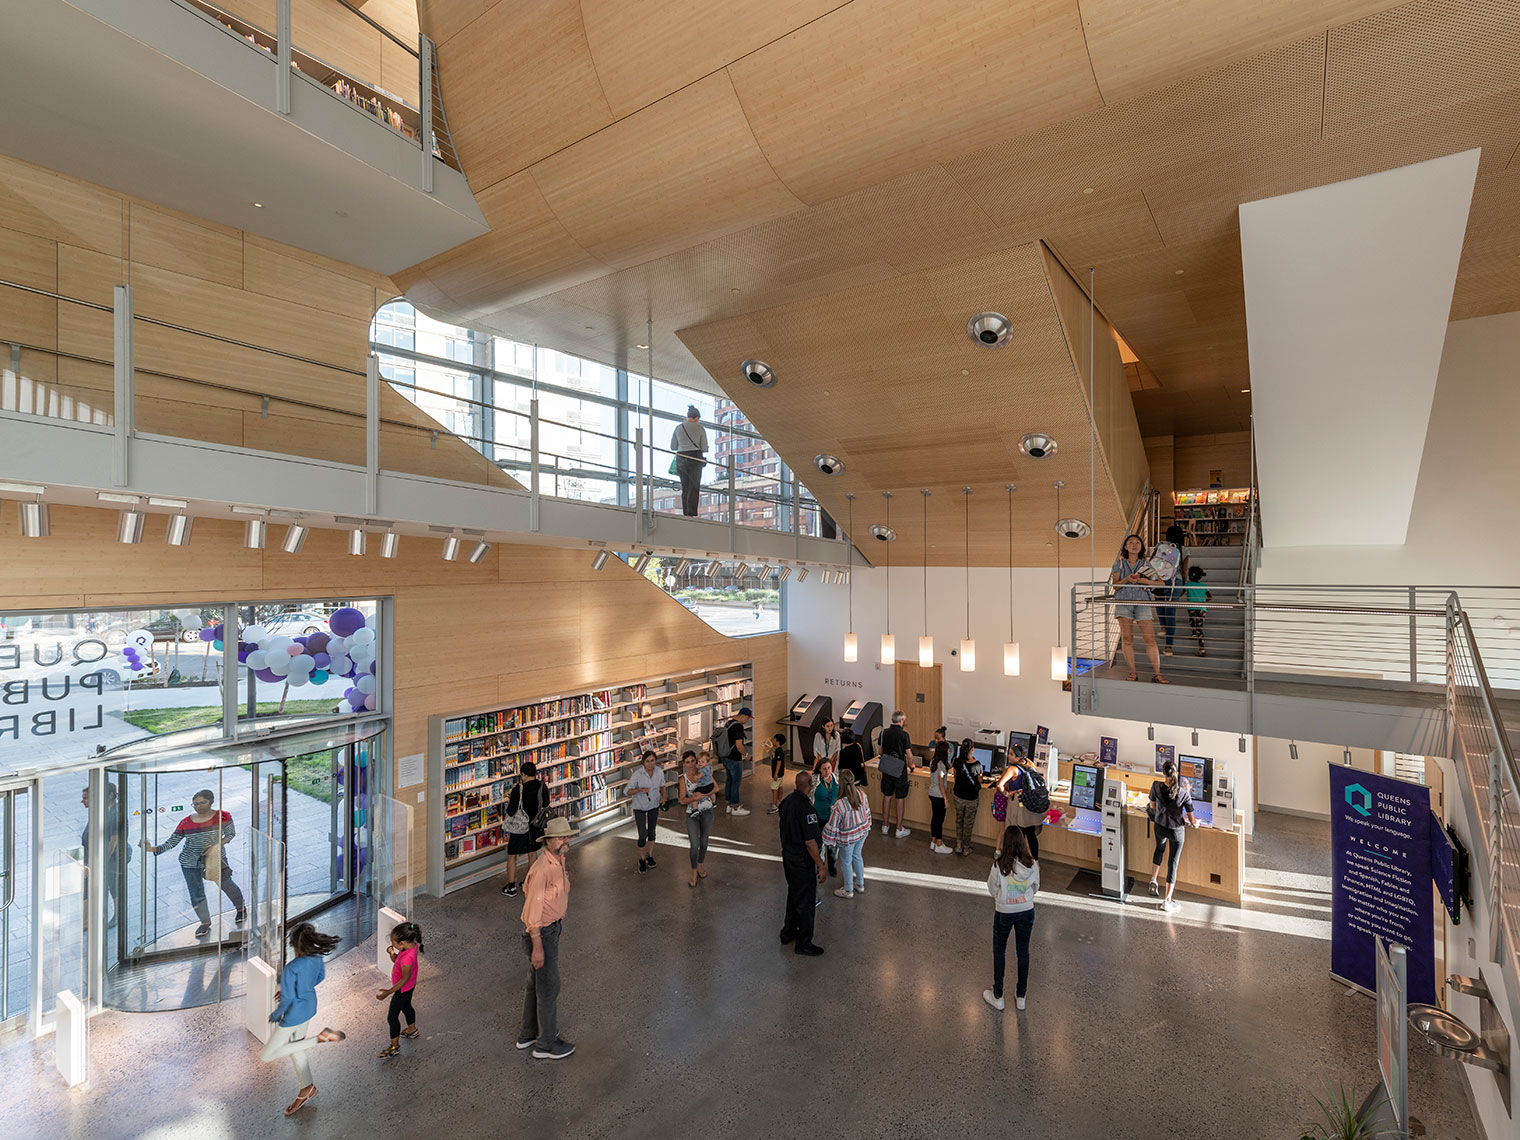 Queens Library - Designed by Steven Holl